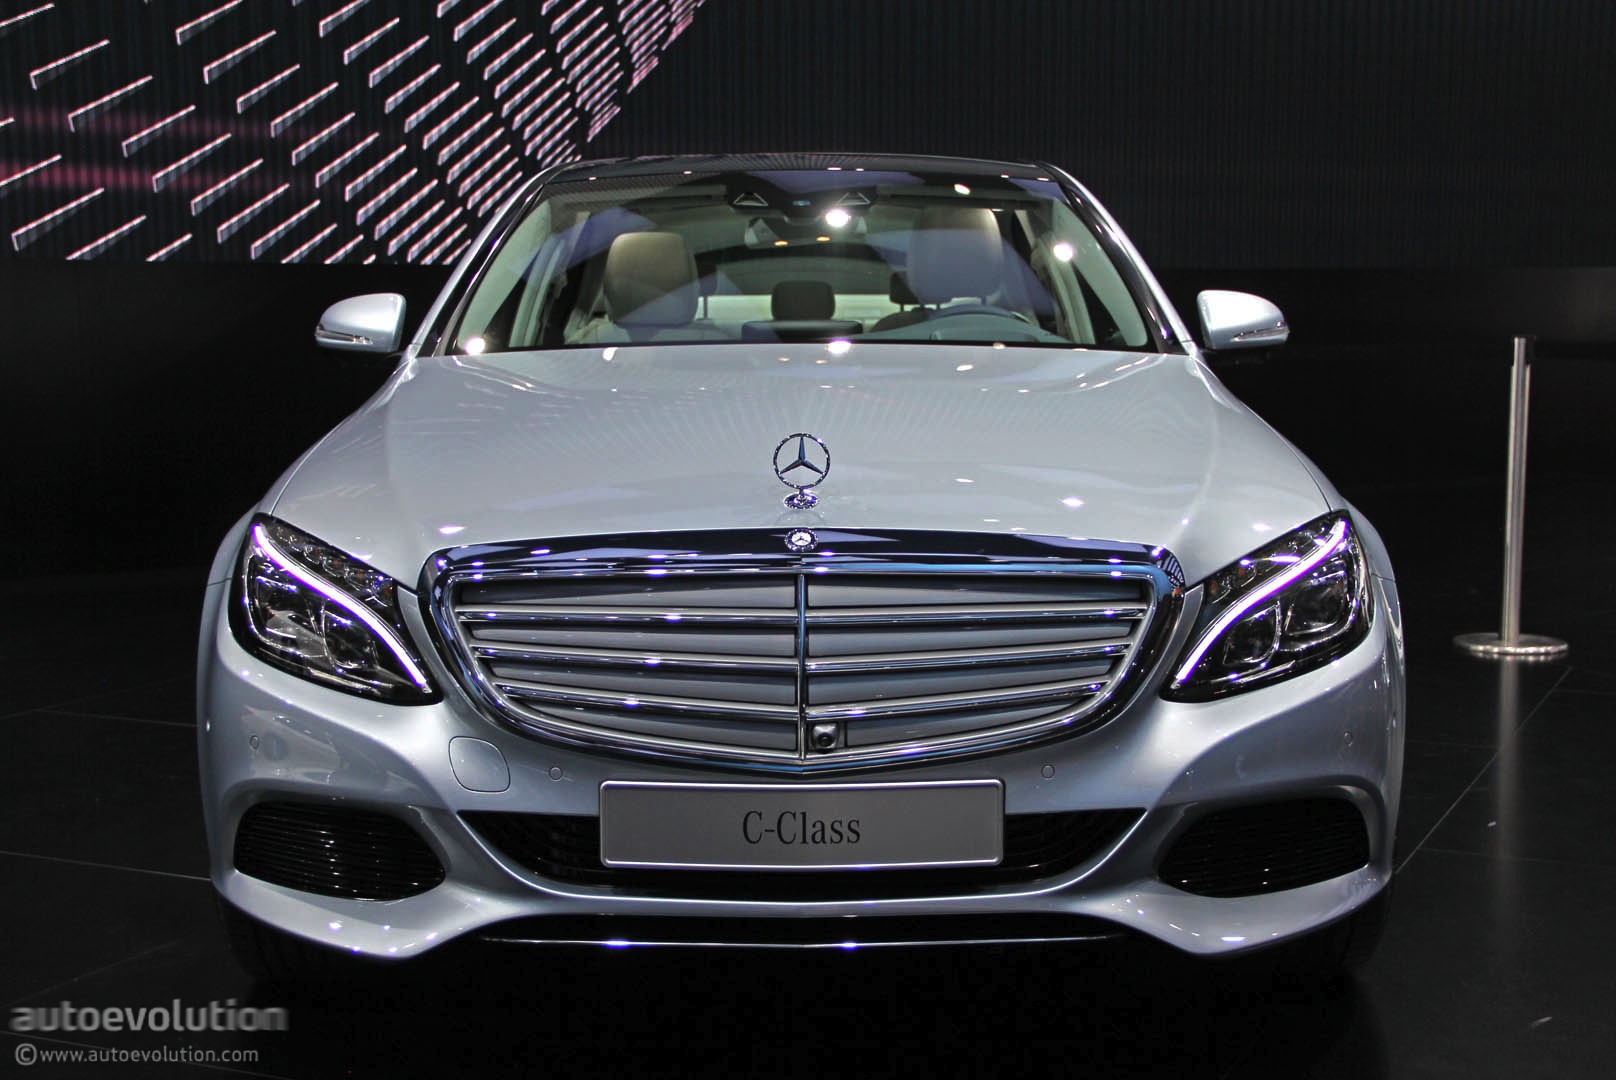 2015 Mercedes C-Class Takes a Luxury Lead in Detroit - Live Photos ...